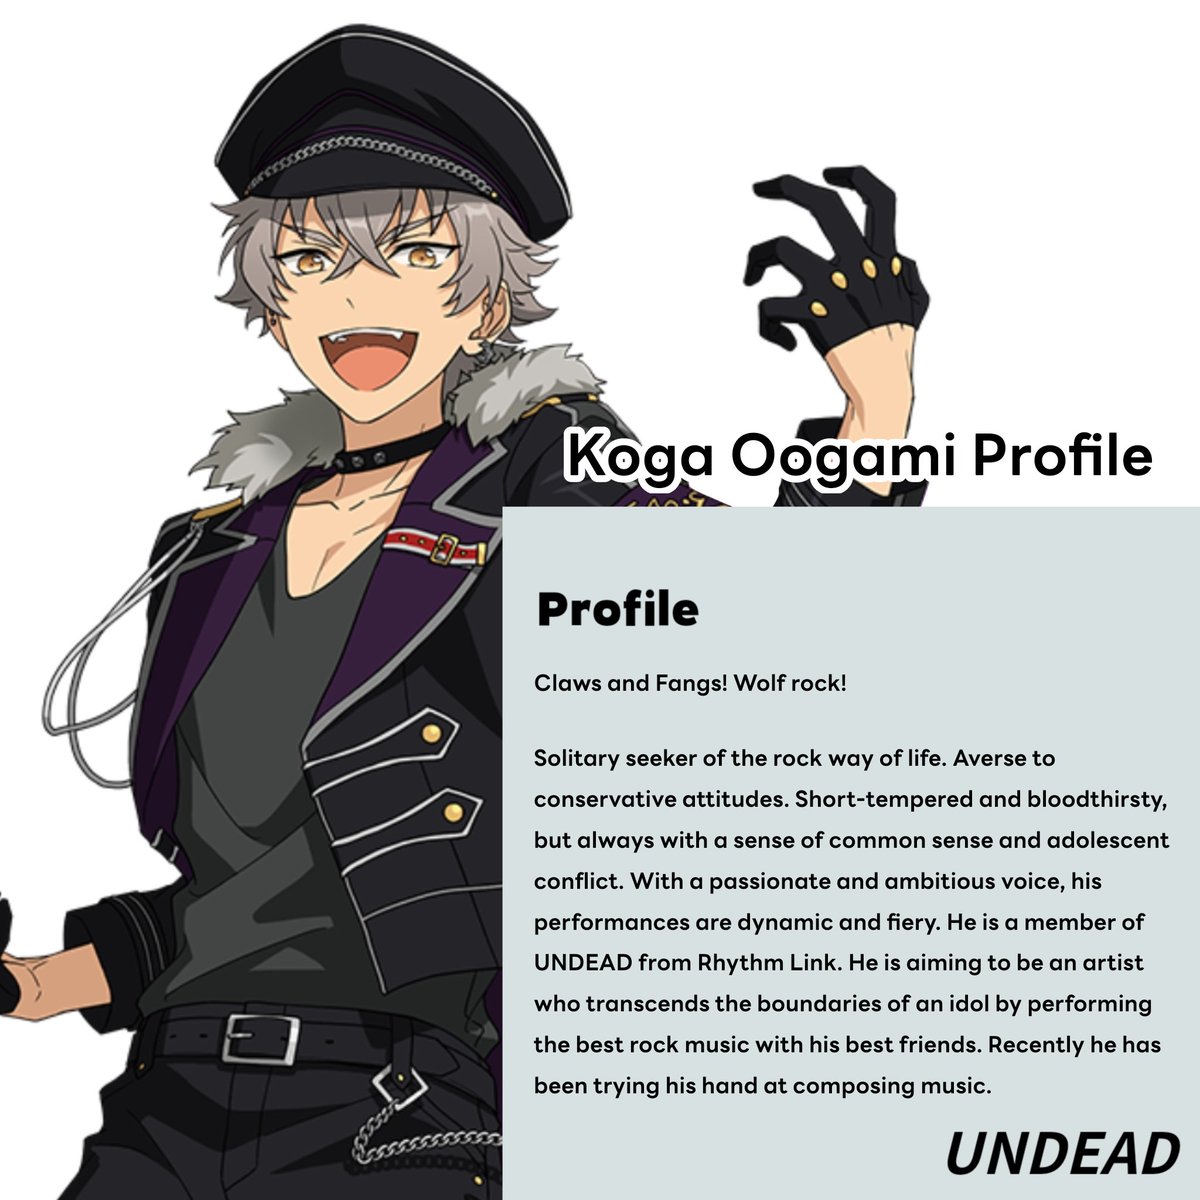 -Koga Profile Update-

They put Songwriting on his Hobby now😭❤️